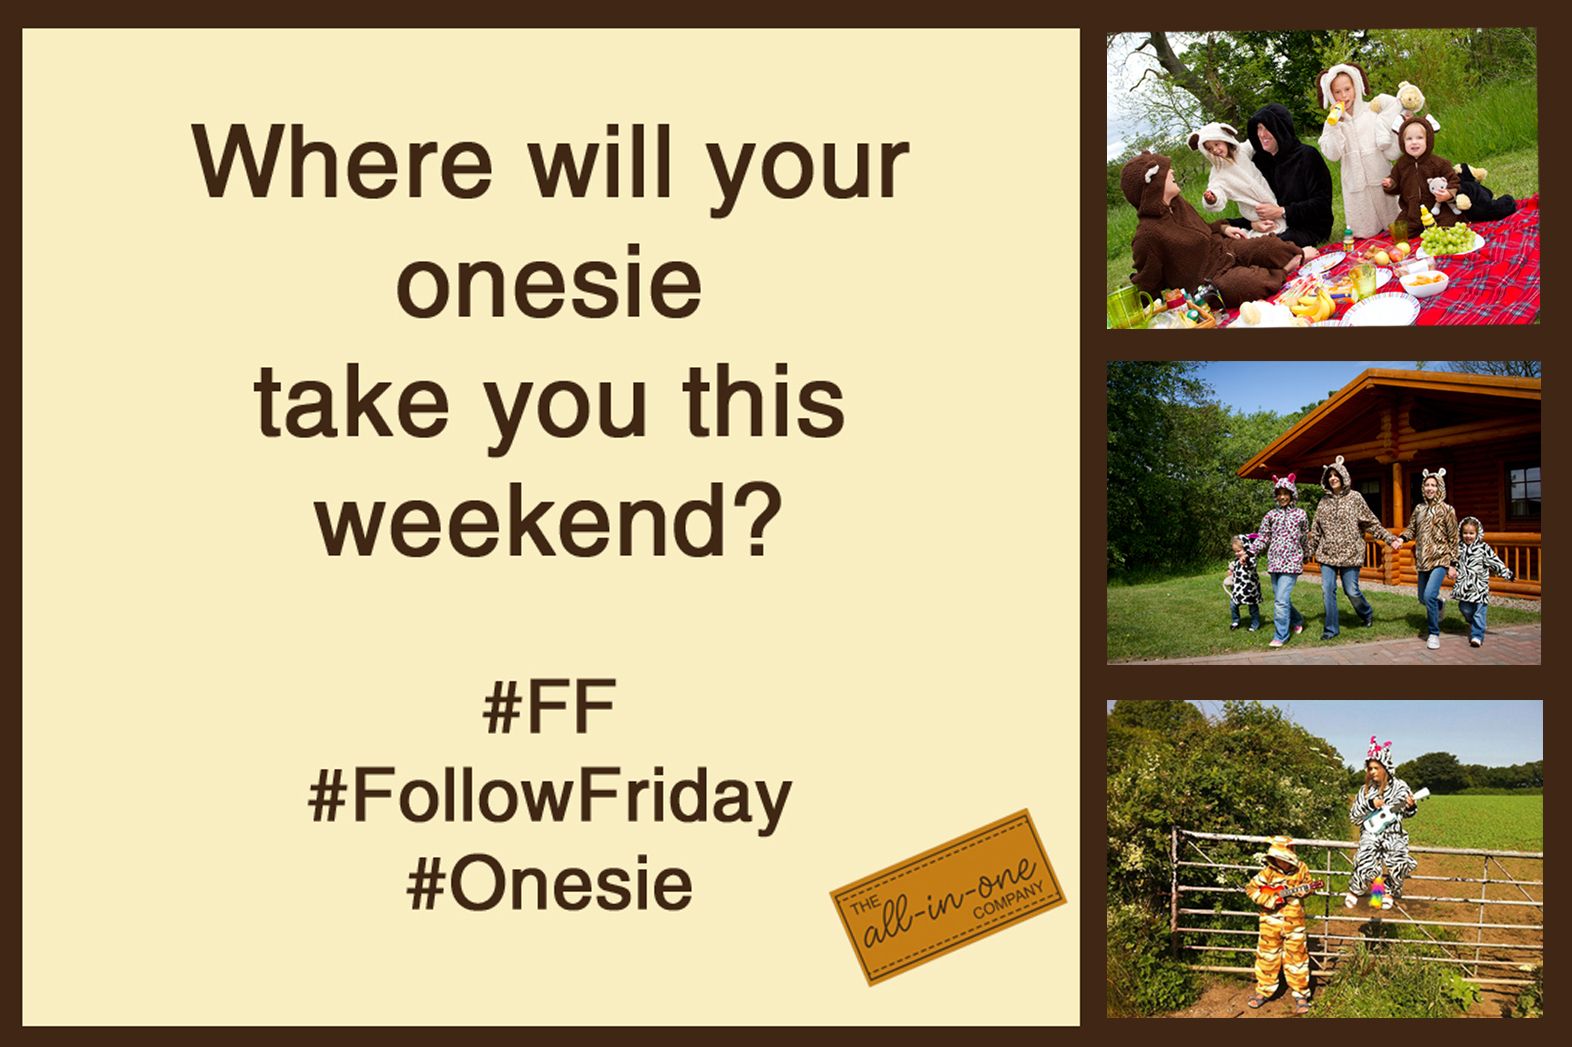 Camping, Caravanning, Family Days Out -  Where will your onesie take you this weekend?